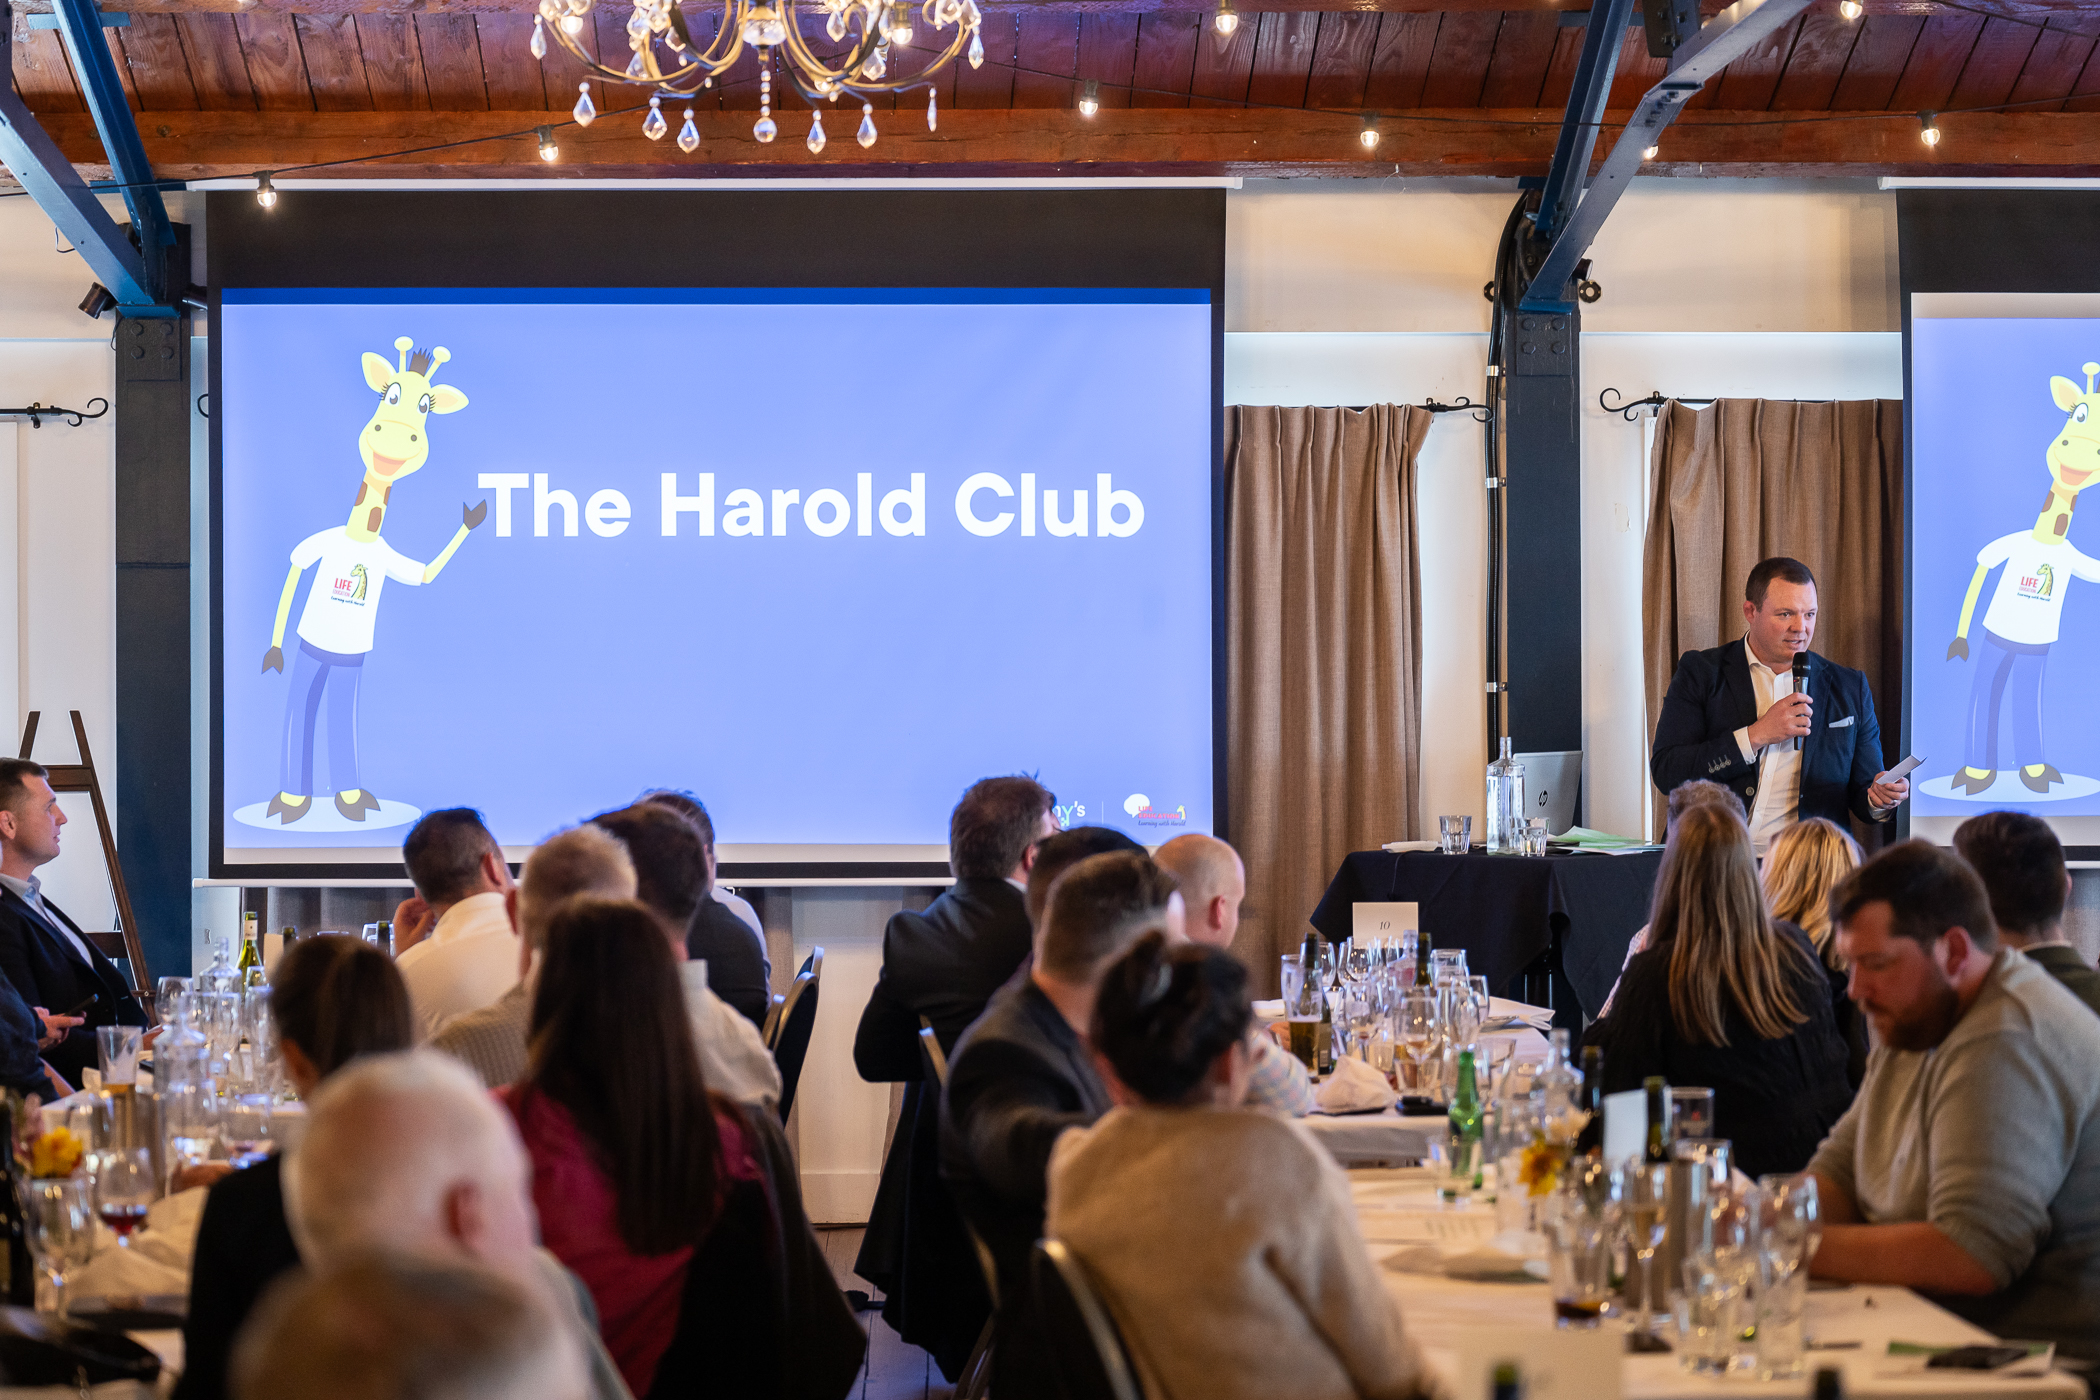 Presenter talking about The Harold Club